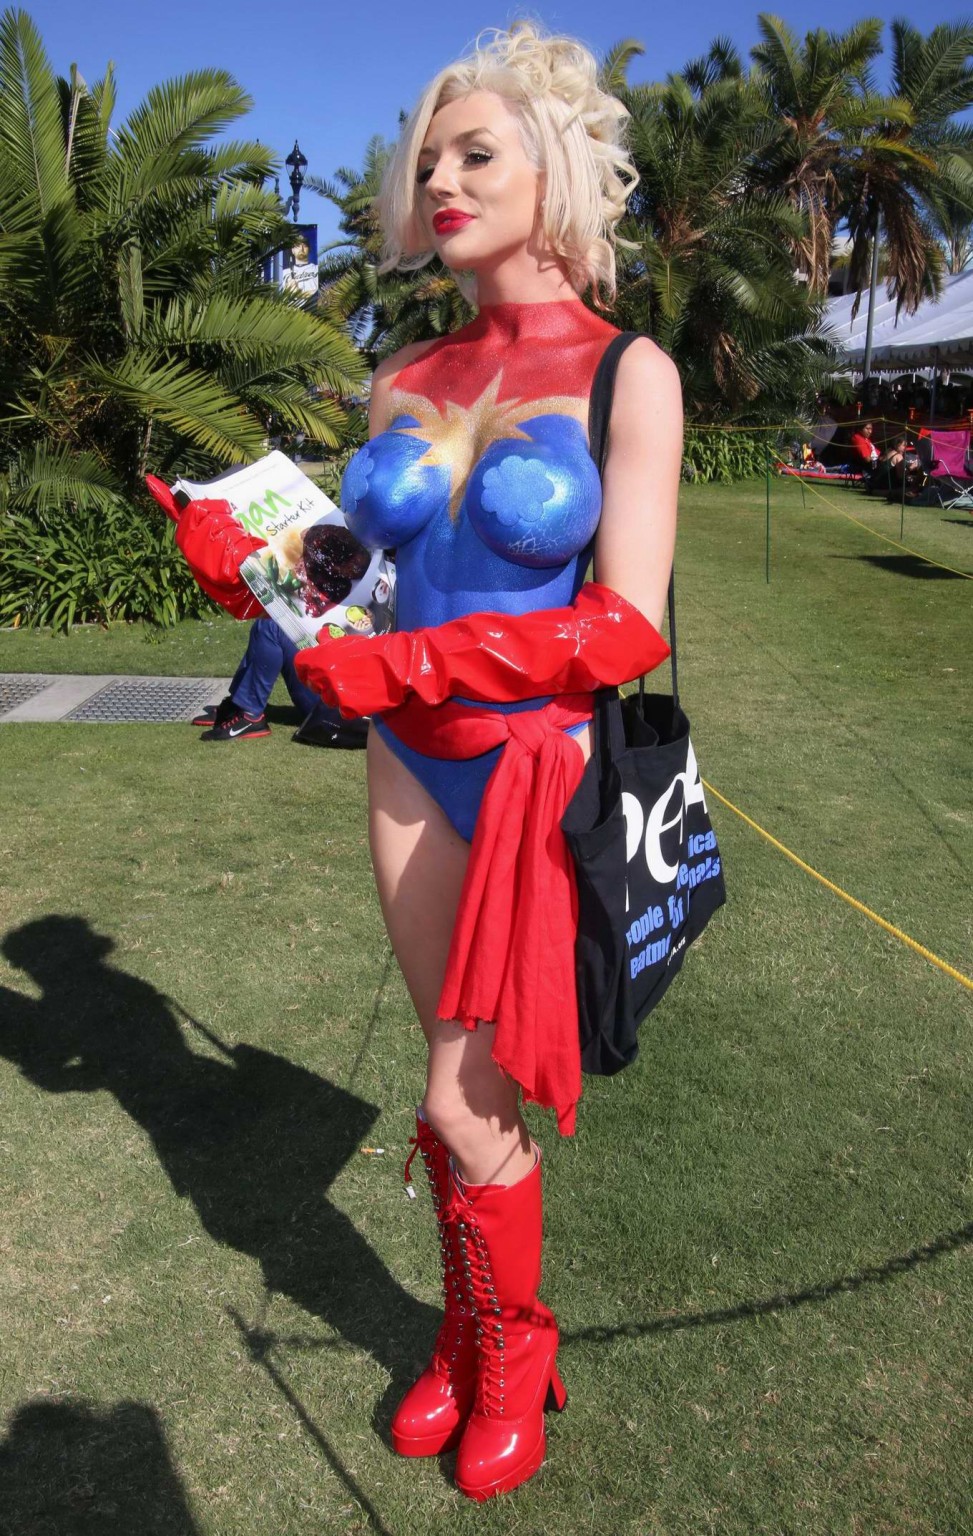 Courtney Stodden naked but bodypainted in public #75158635